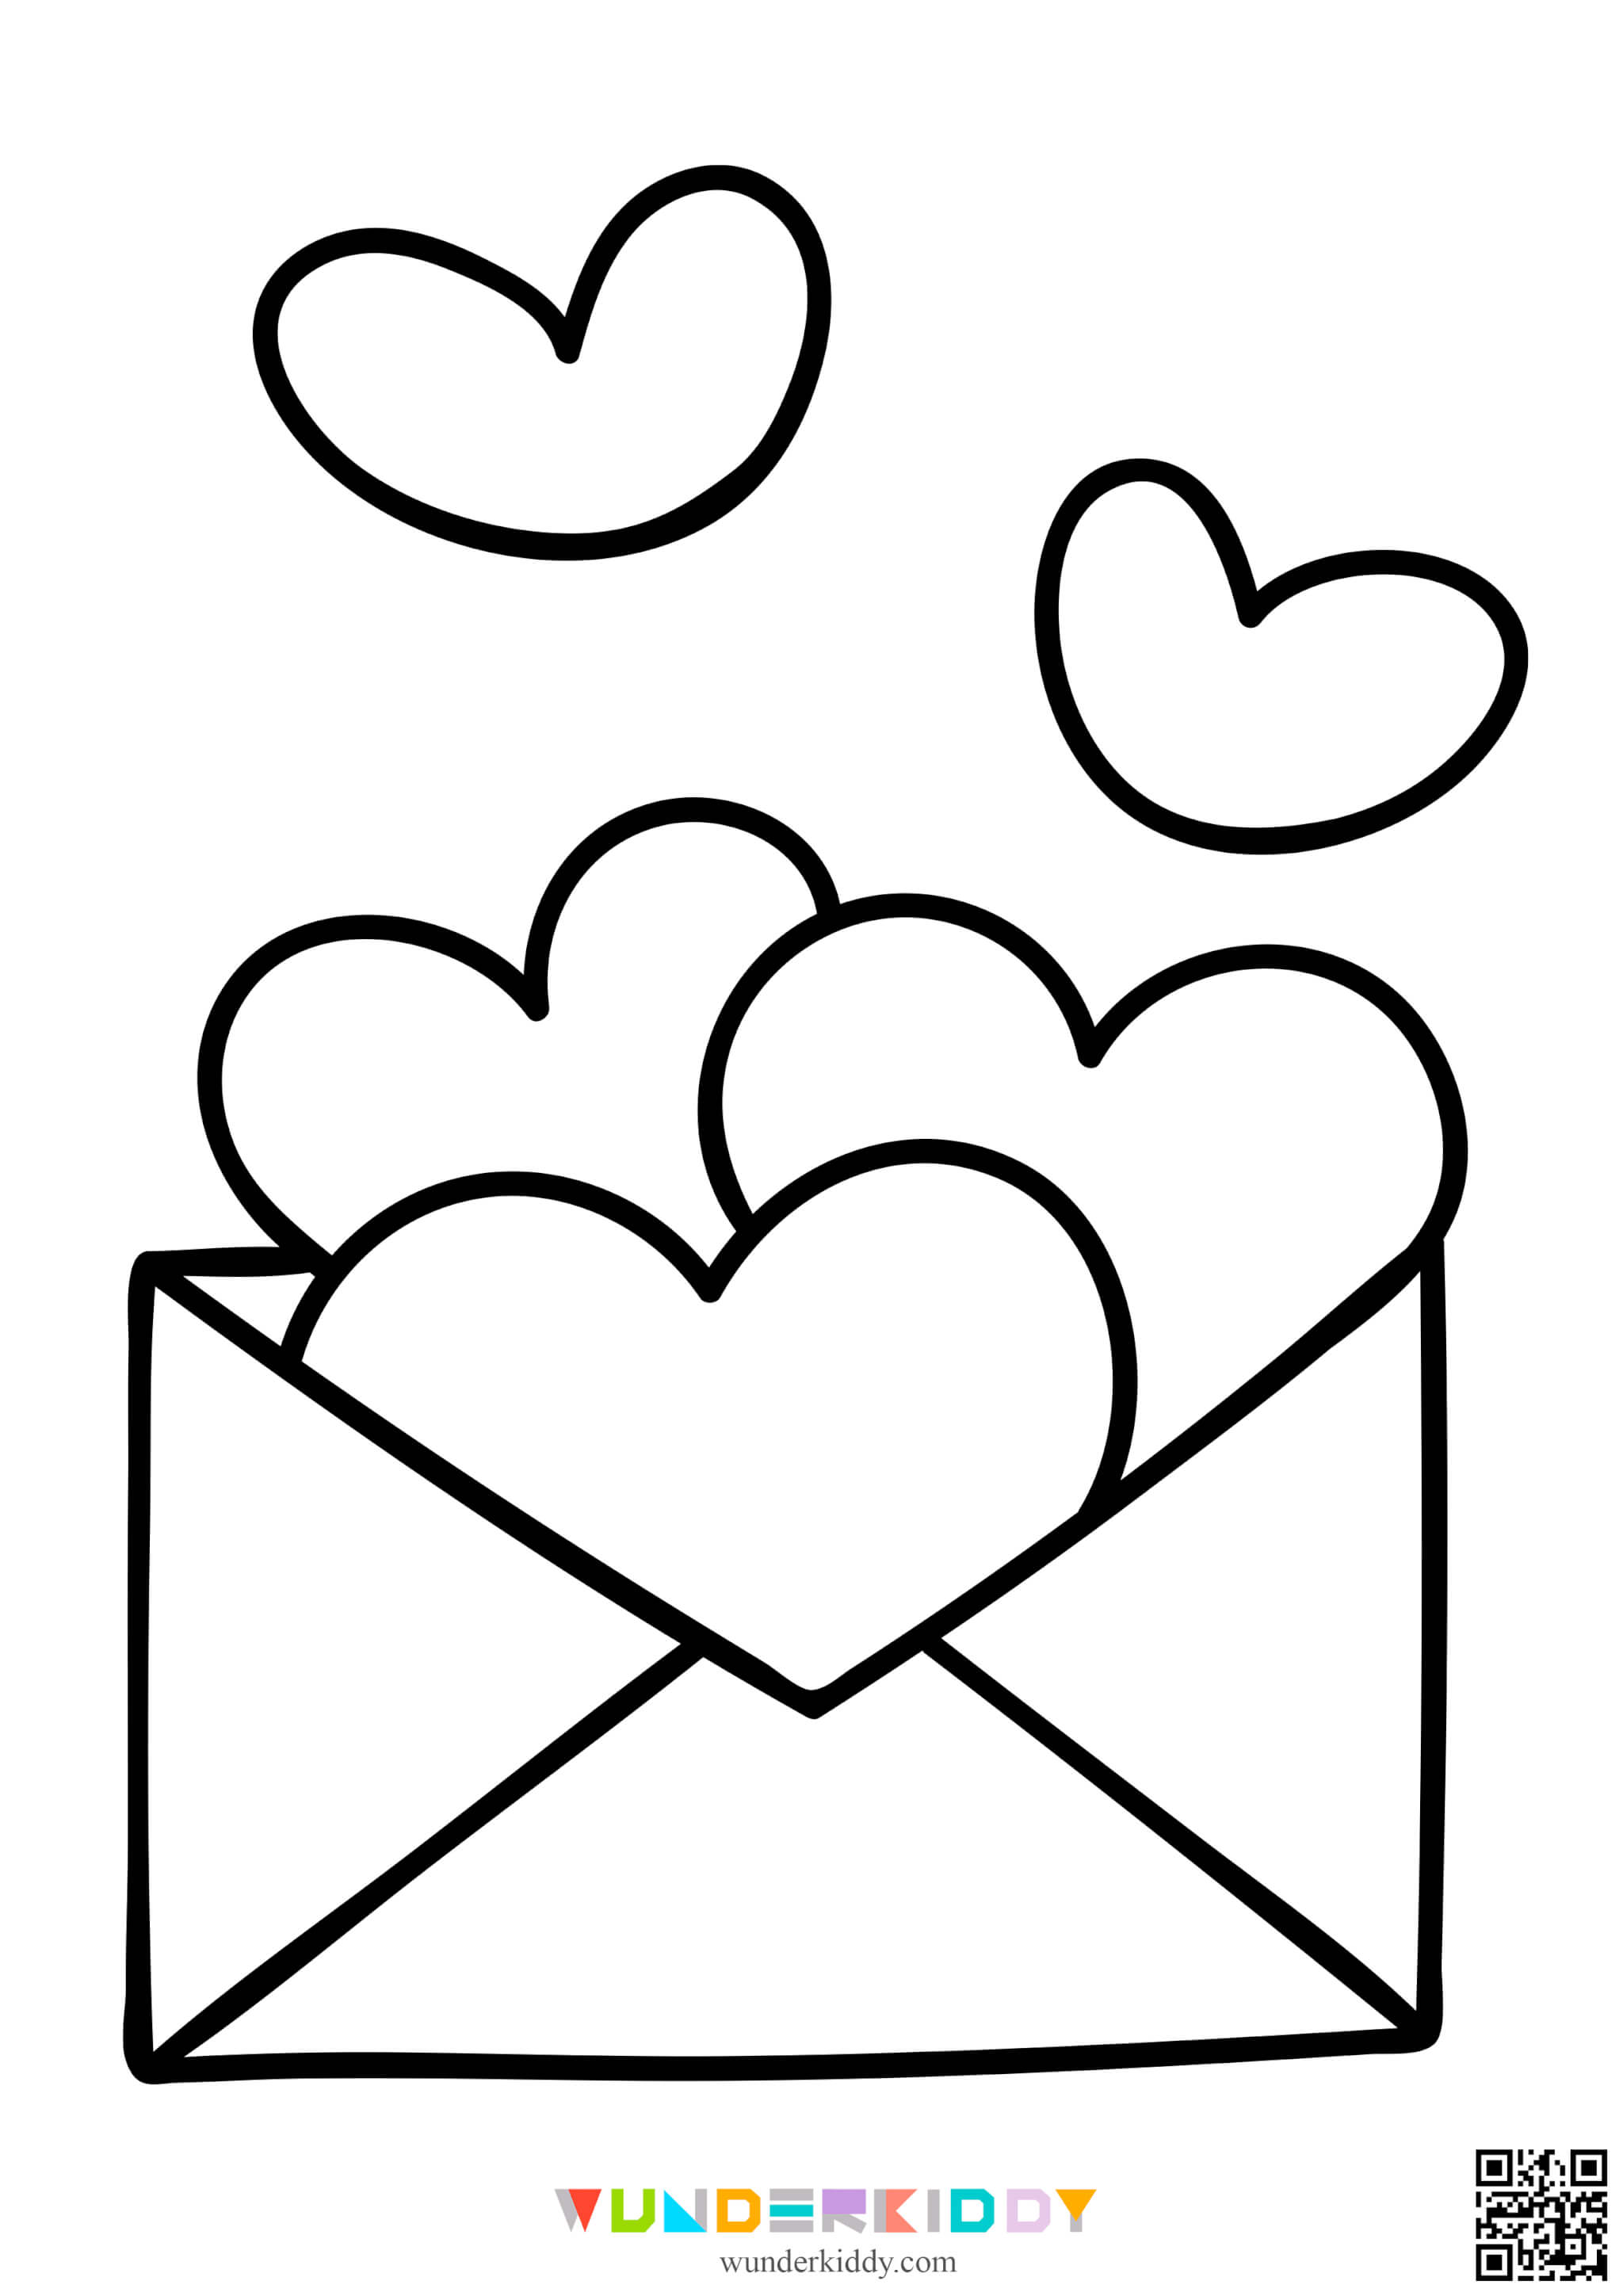 Valentines Coloring Pages - Image 17